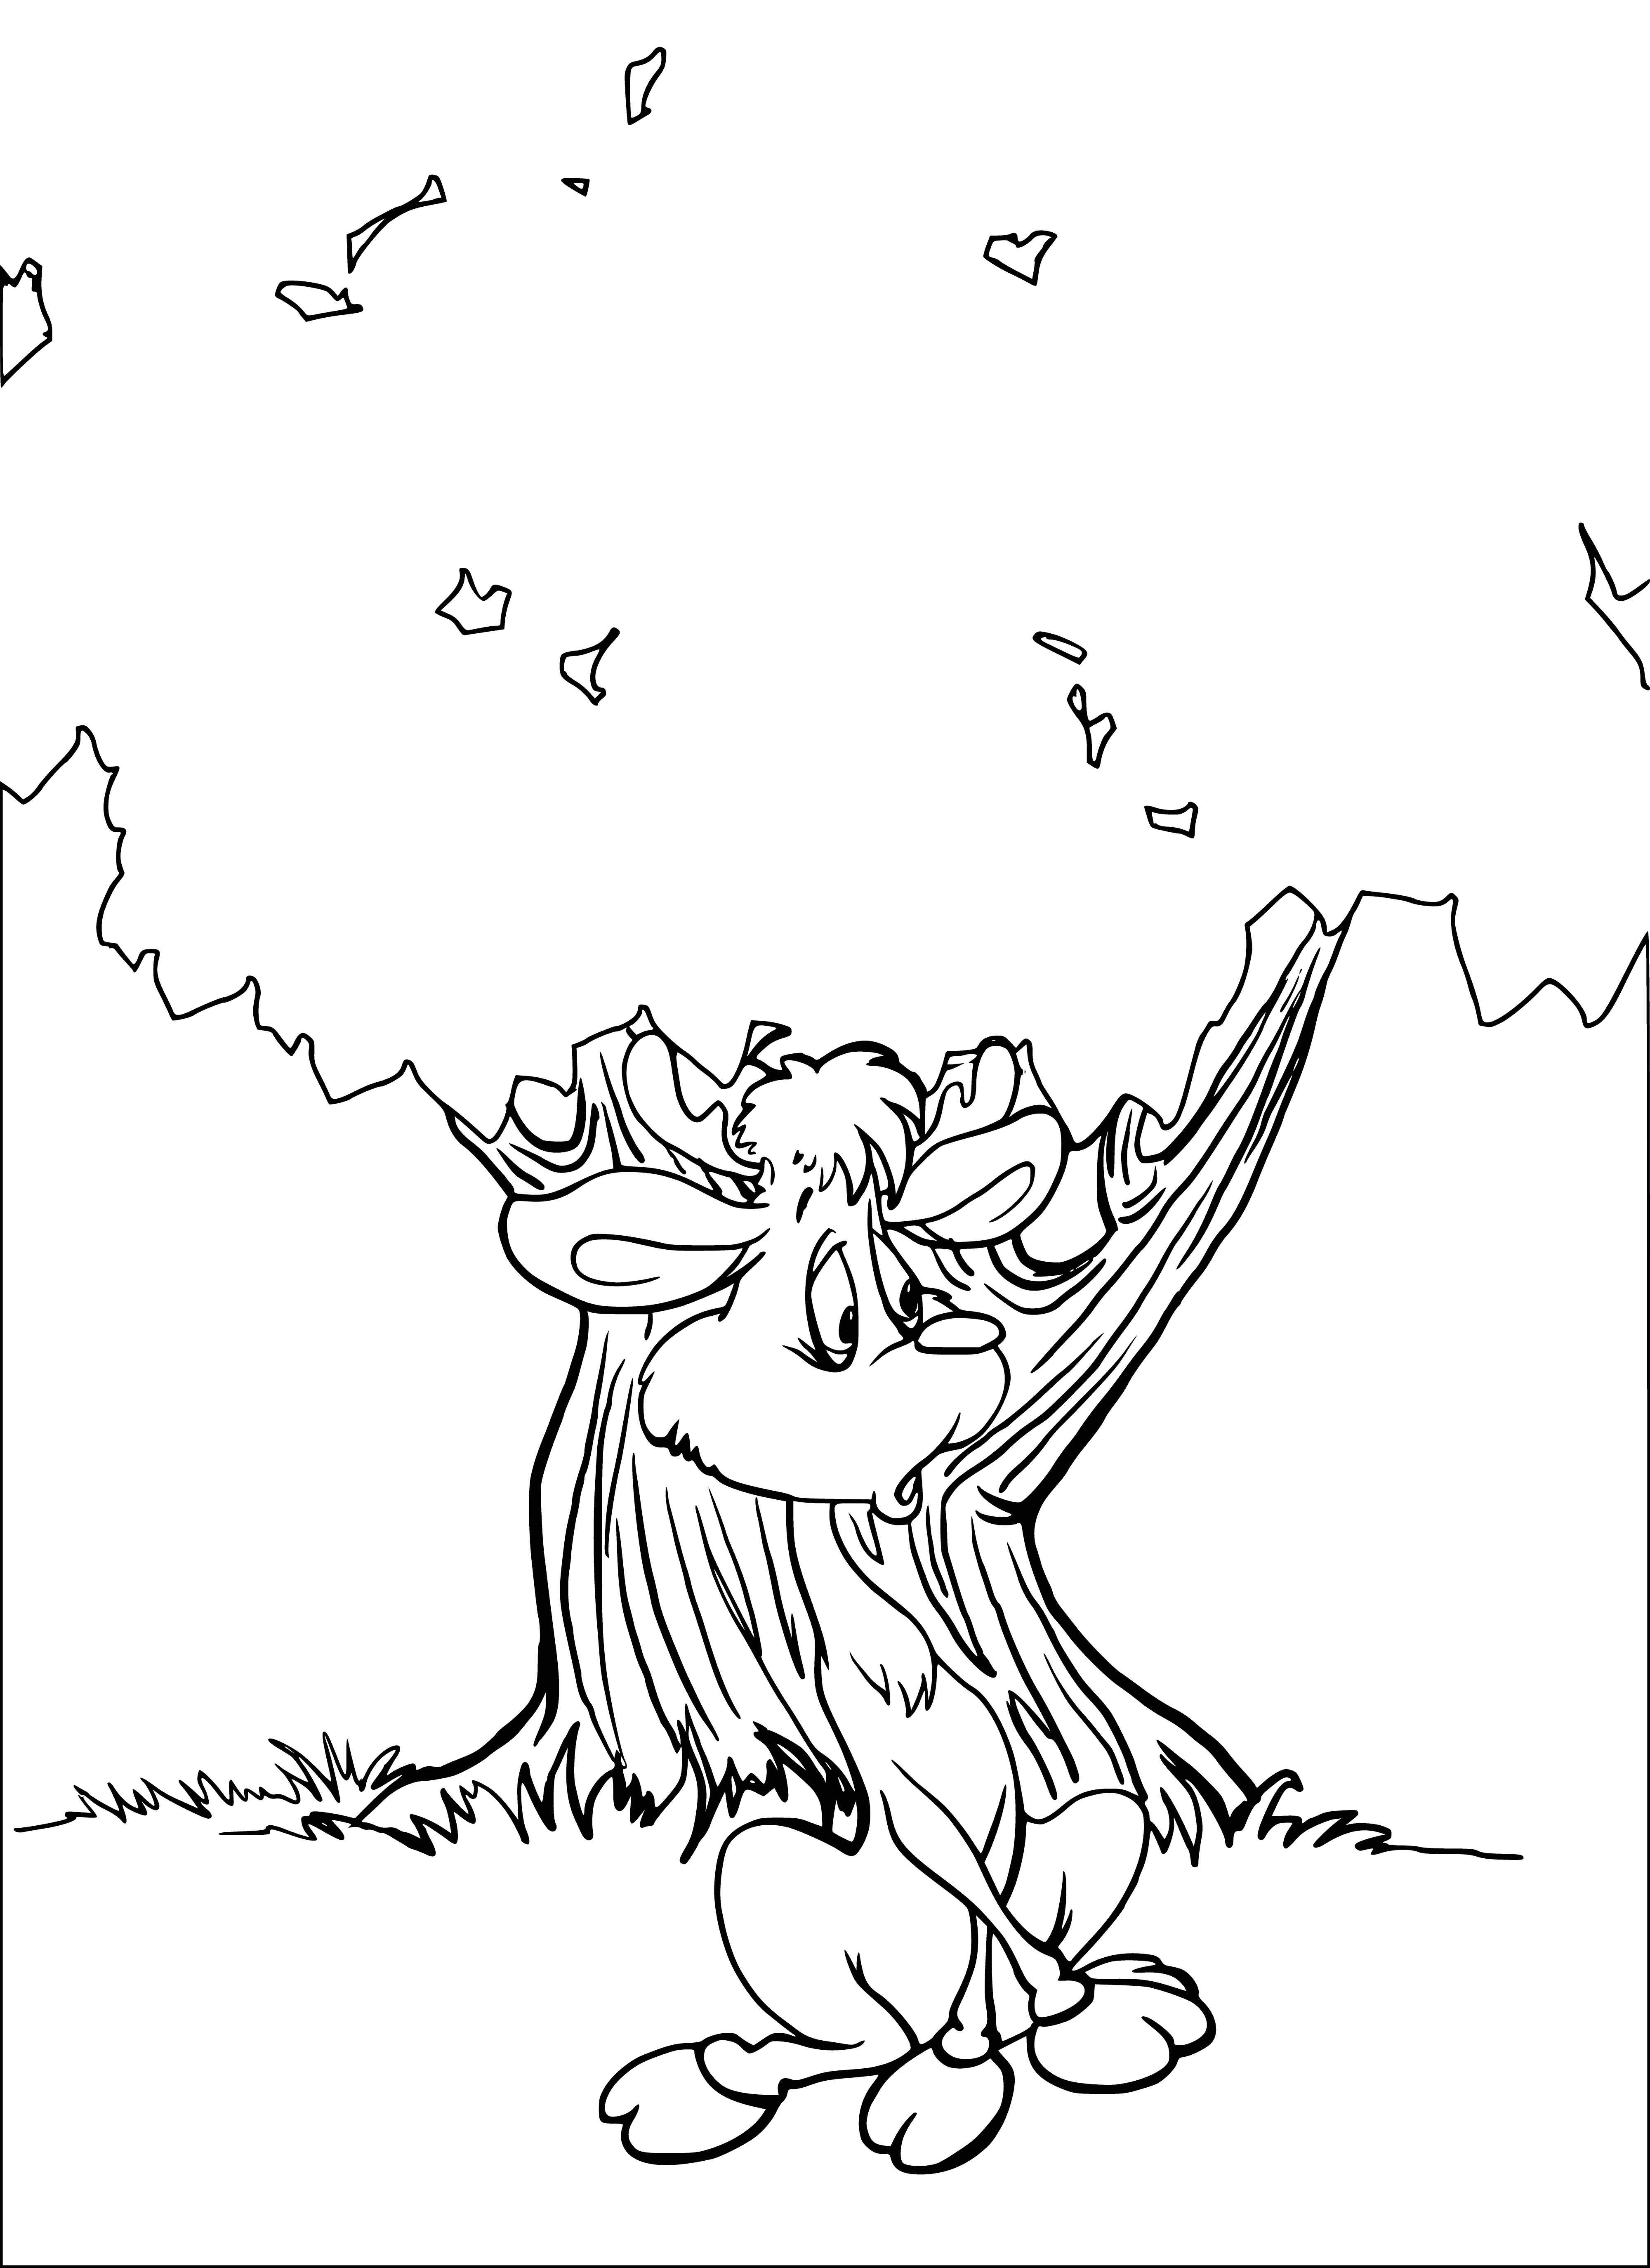 coloring page: Two girls, similar age & dressed in color, holding hands & smiling in a backyard.